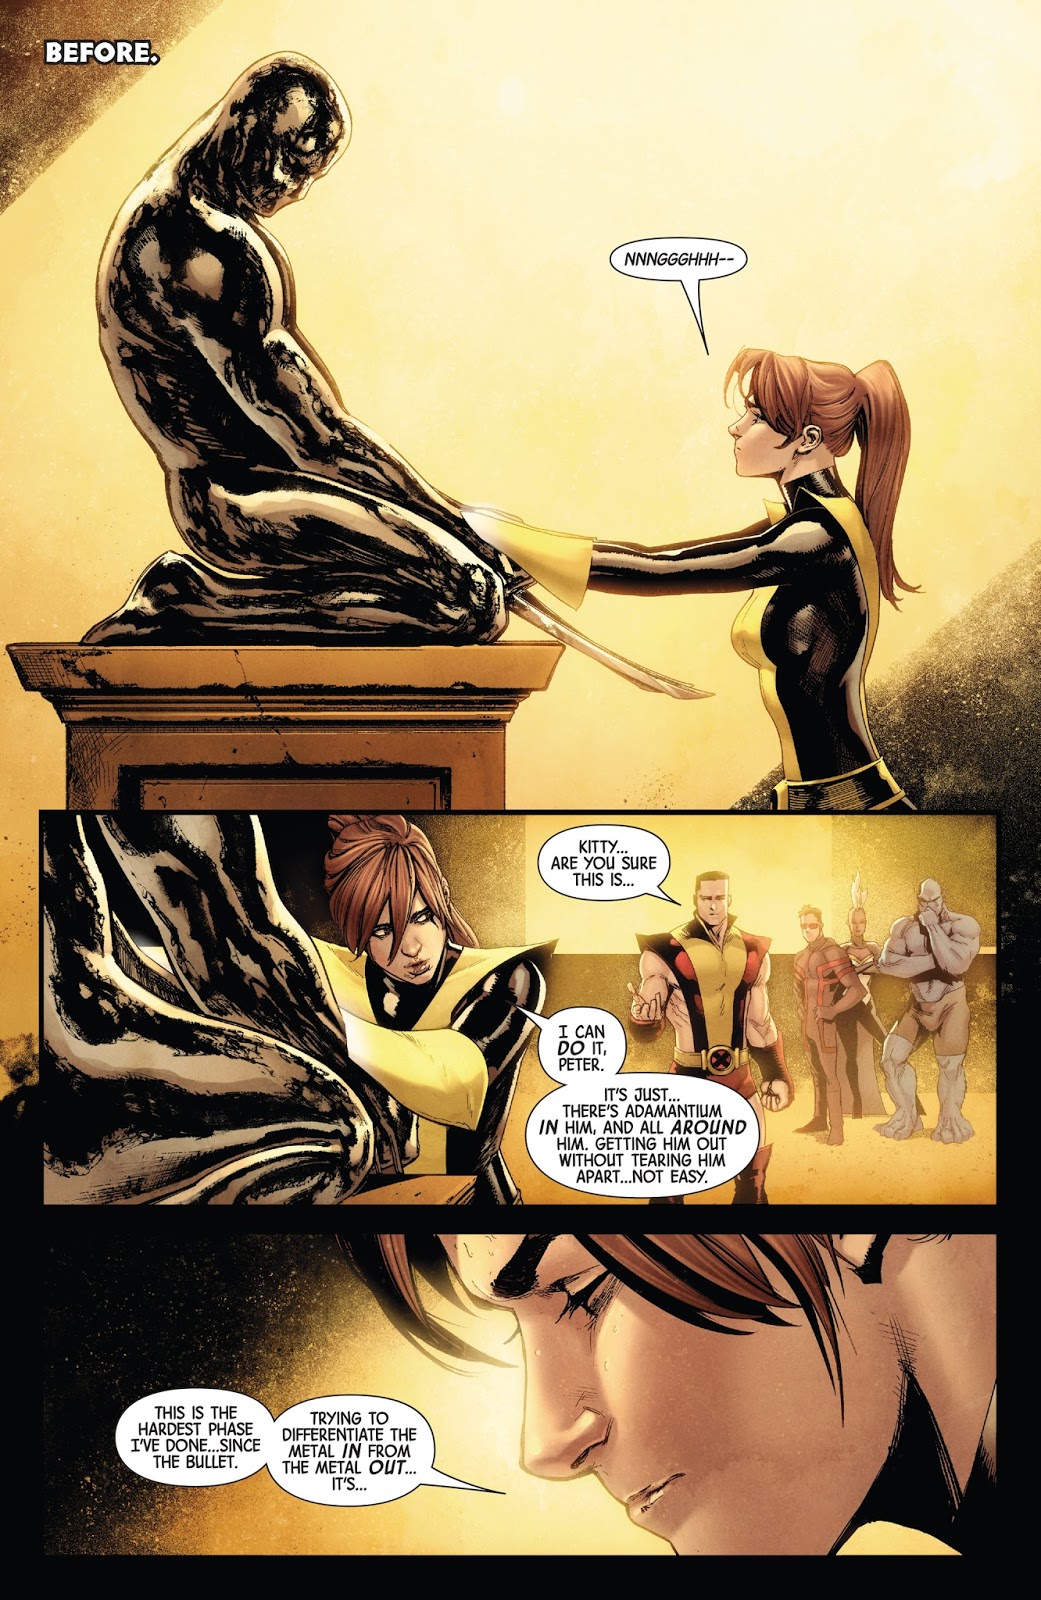 Wolverine's Funeral (Hunt For Wolverine)